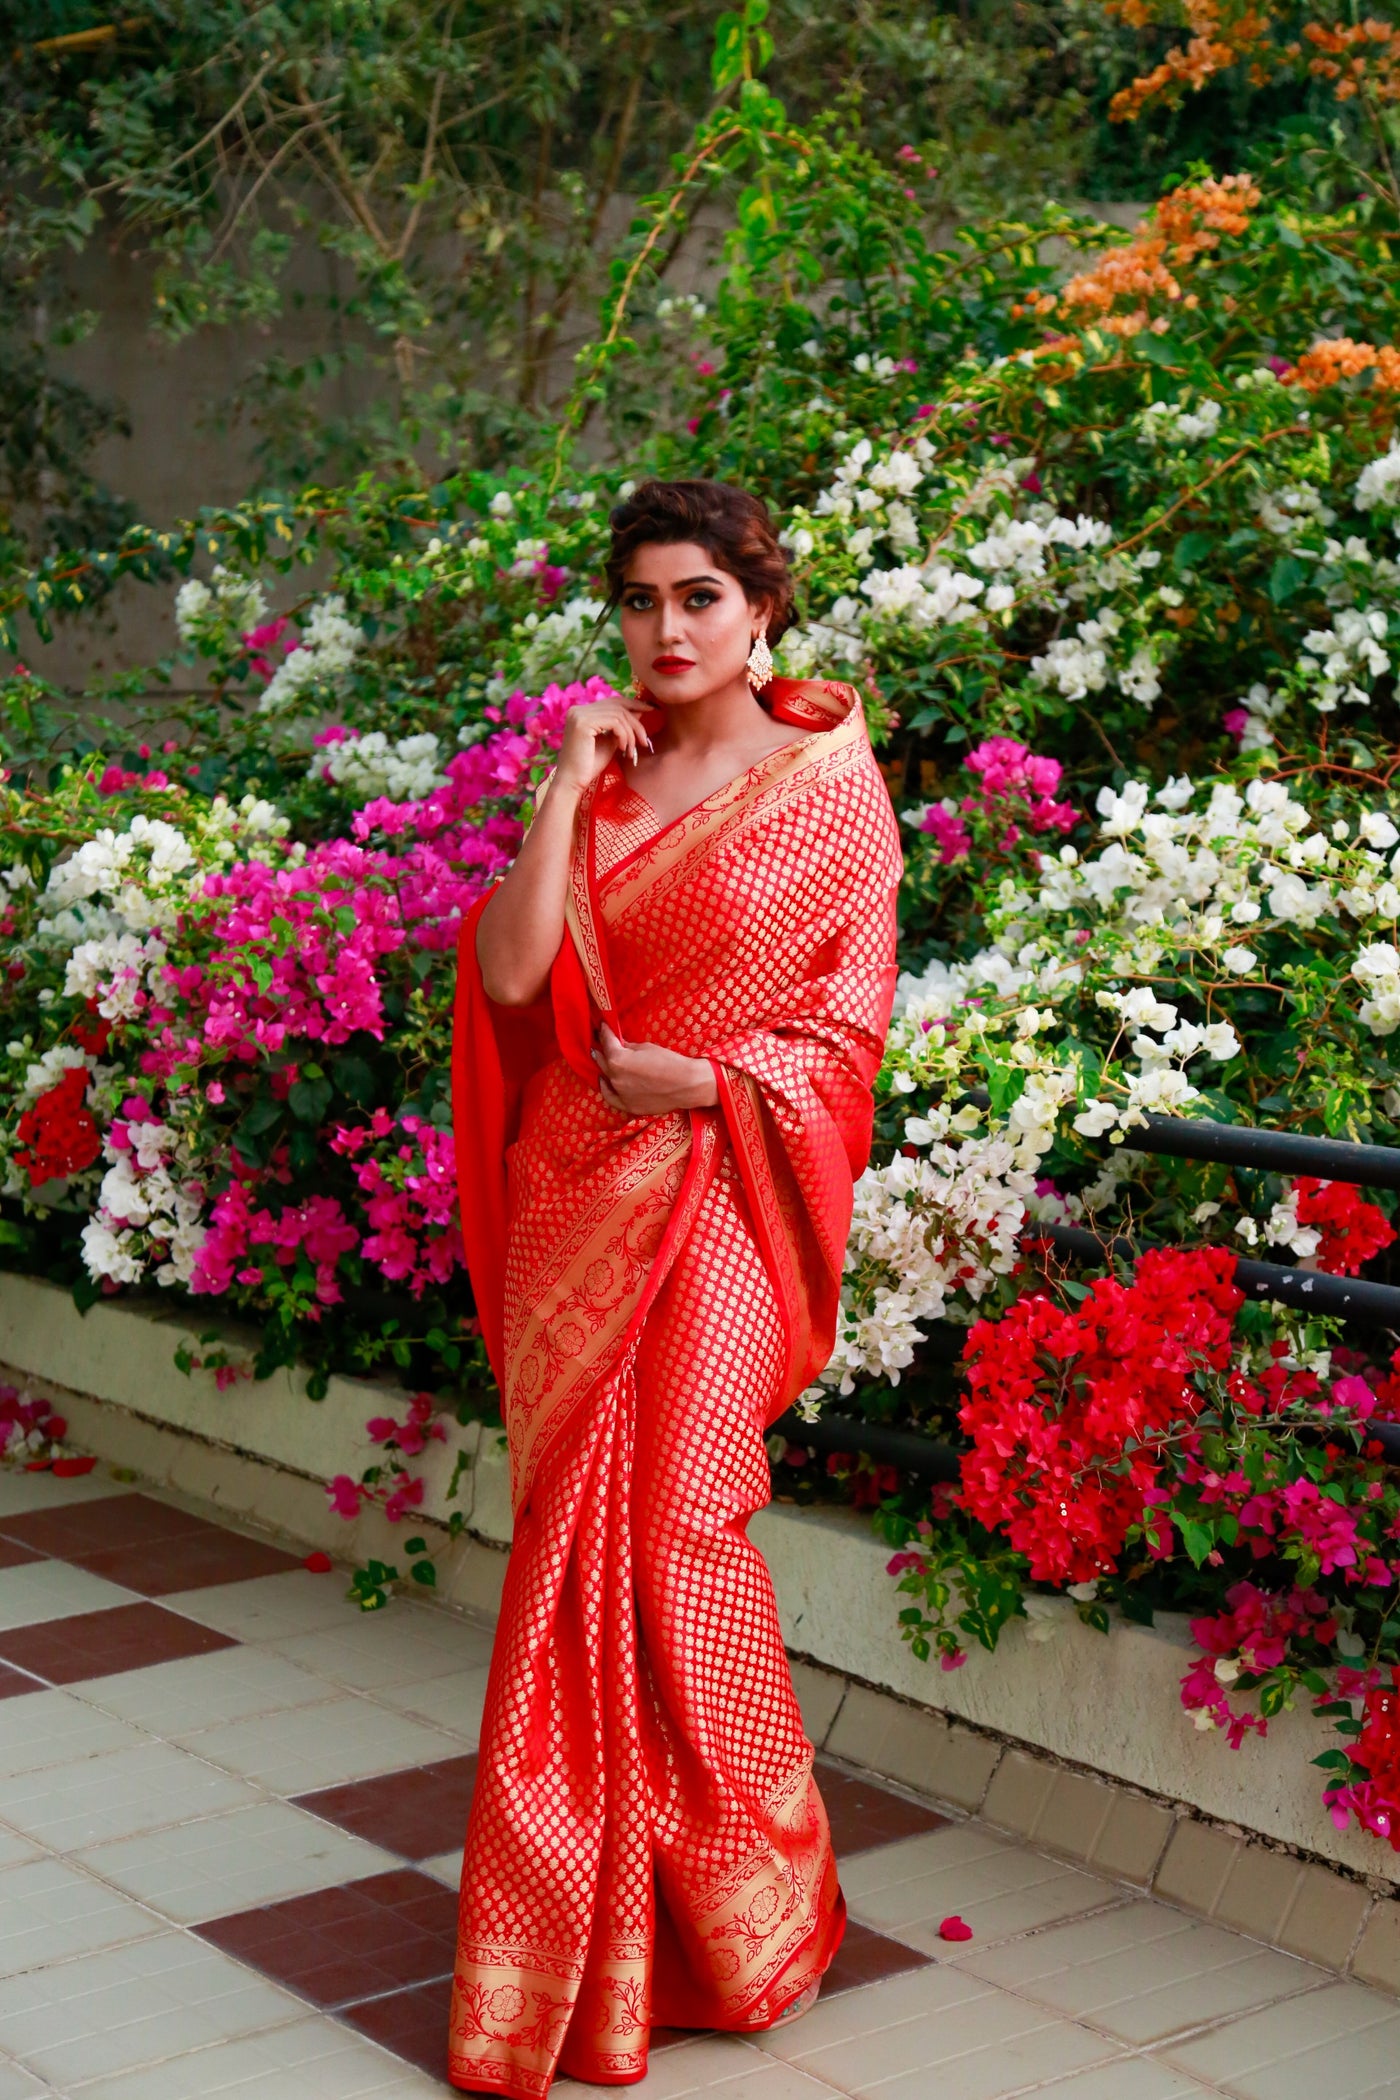 Red Banarasi Silk Saree Indian Clothing in Denver, CO, Aurora, CO, Boulder, CO, Fort Collins, CO, Colorado Springs, CO, Parker, CO, Highlands Ranch, CO, Cherry Creek, CO, Centennial, CO, and Longmont, CO. NATIONWIDE SHIPPING USA- India Fashion X